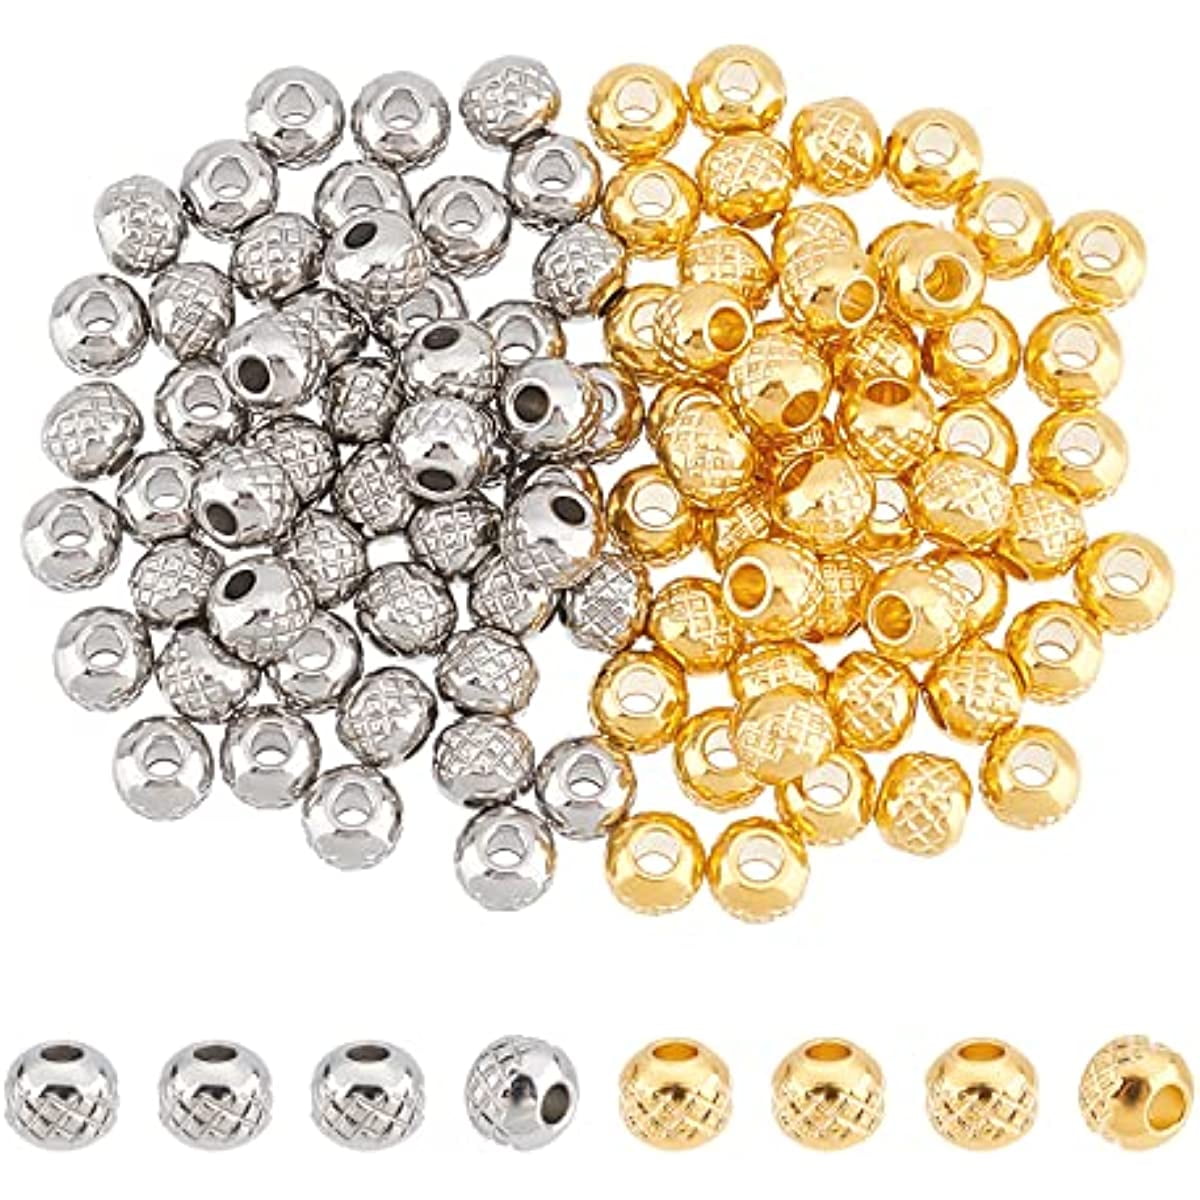 Original Gold Color Metal Spacer Beads 304 Stainless Steel Smooth Round  Loose Beads for DIY Bracelet Necklace Jewelry Making